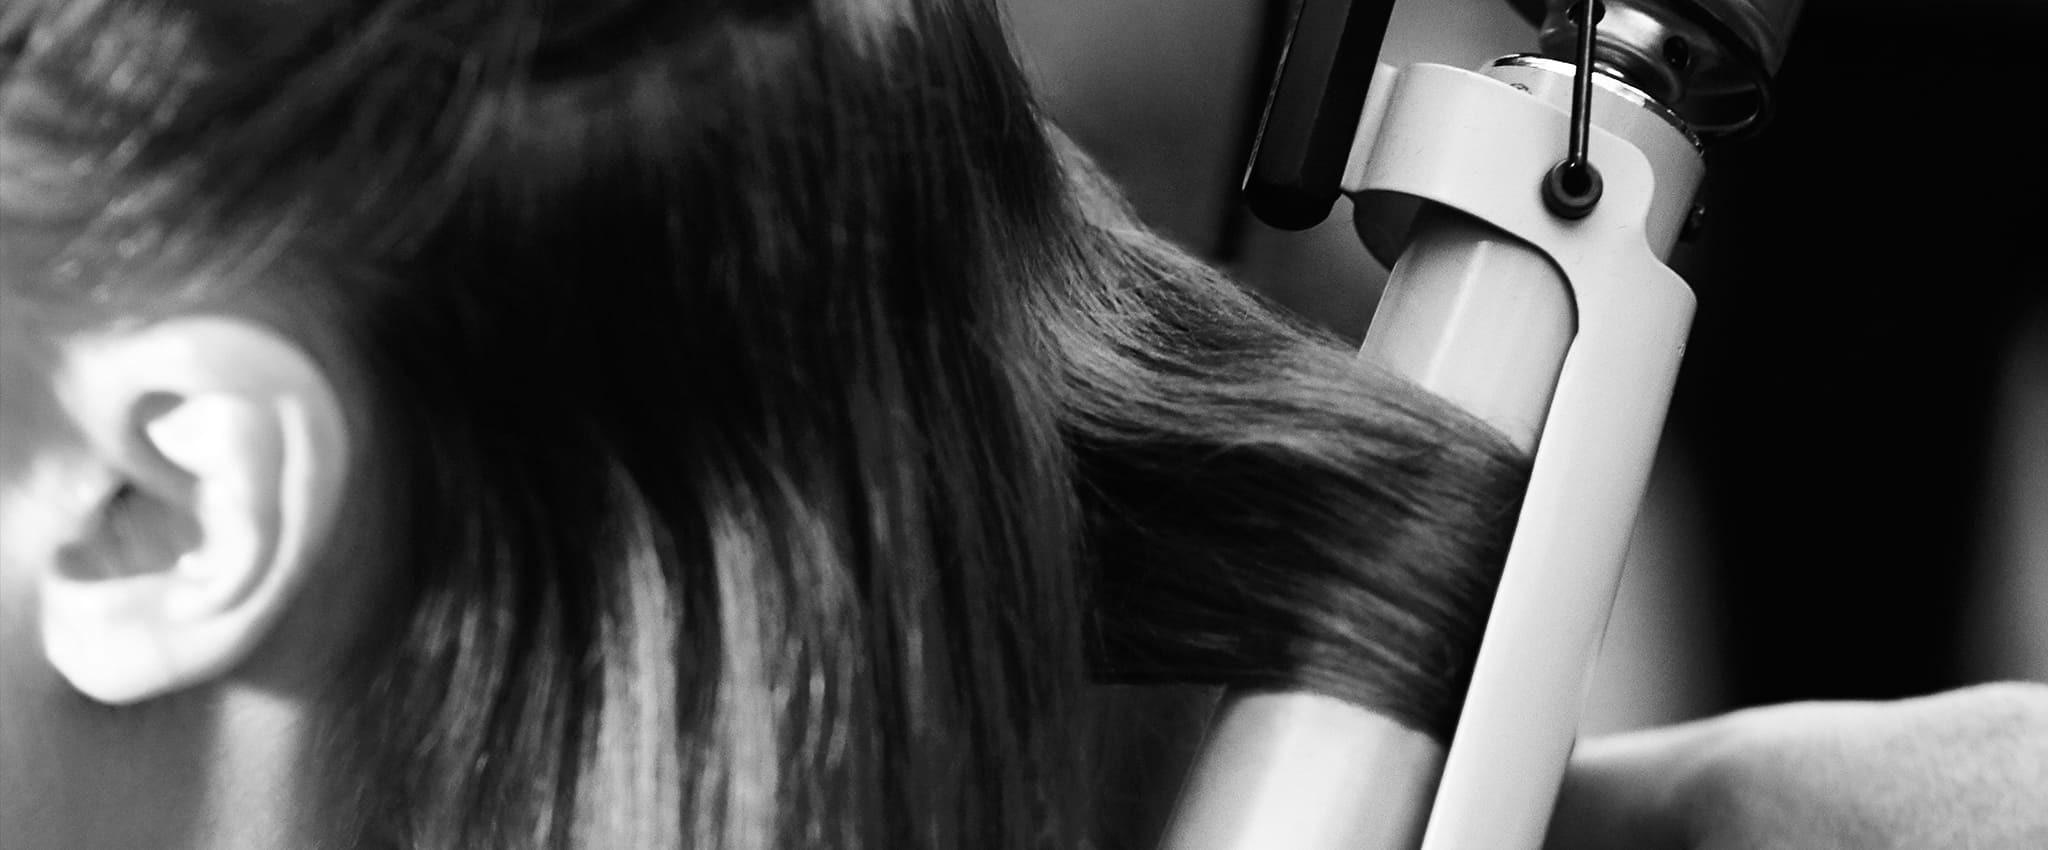 Black and white close up on the side of a model's head with a section of her hair in curling tongs and a stylist's hand just visible